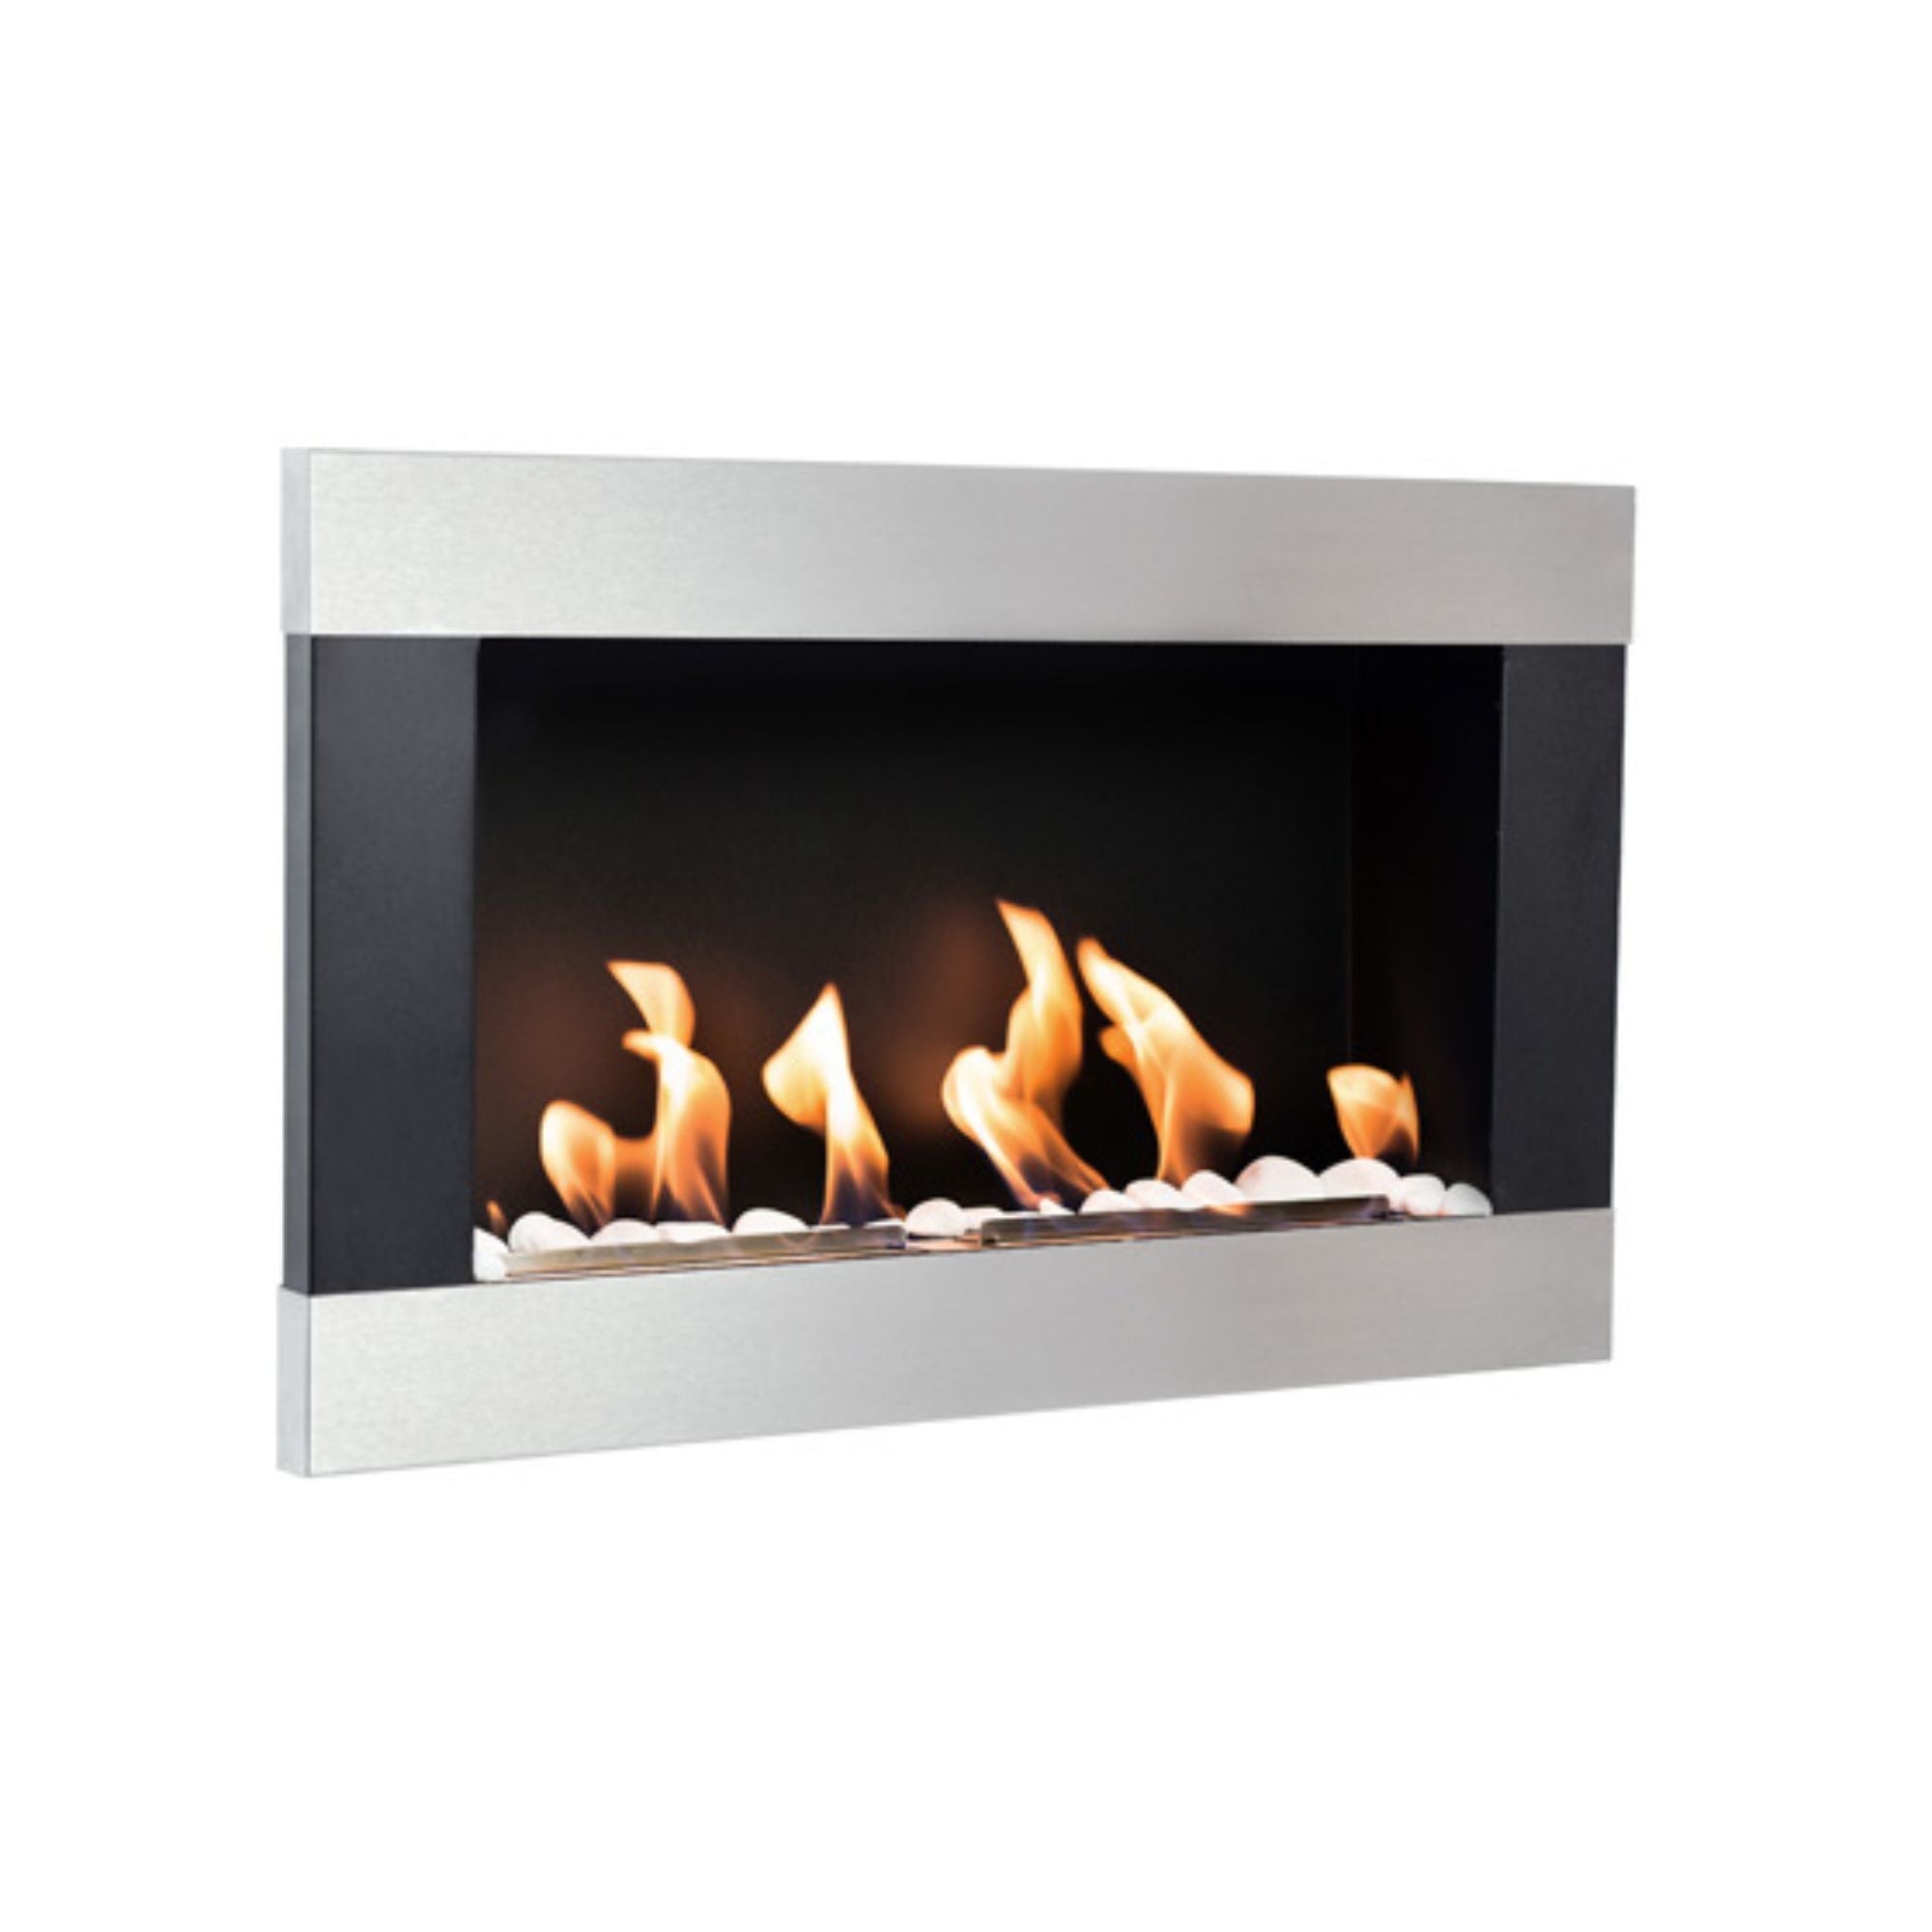 BIO-Ethanol Easy Built-in - Wall-mounted fireplace 65 cm